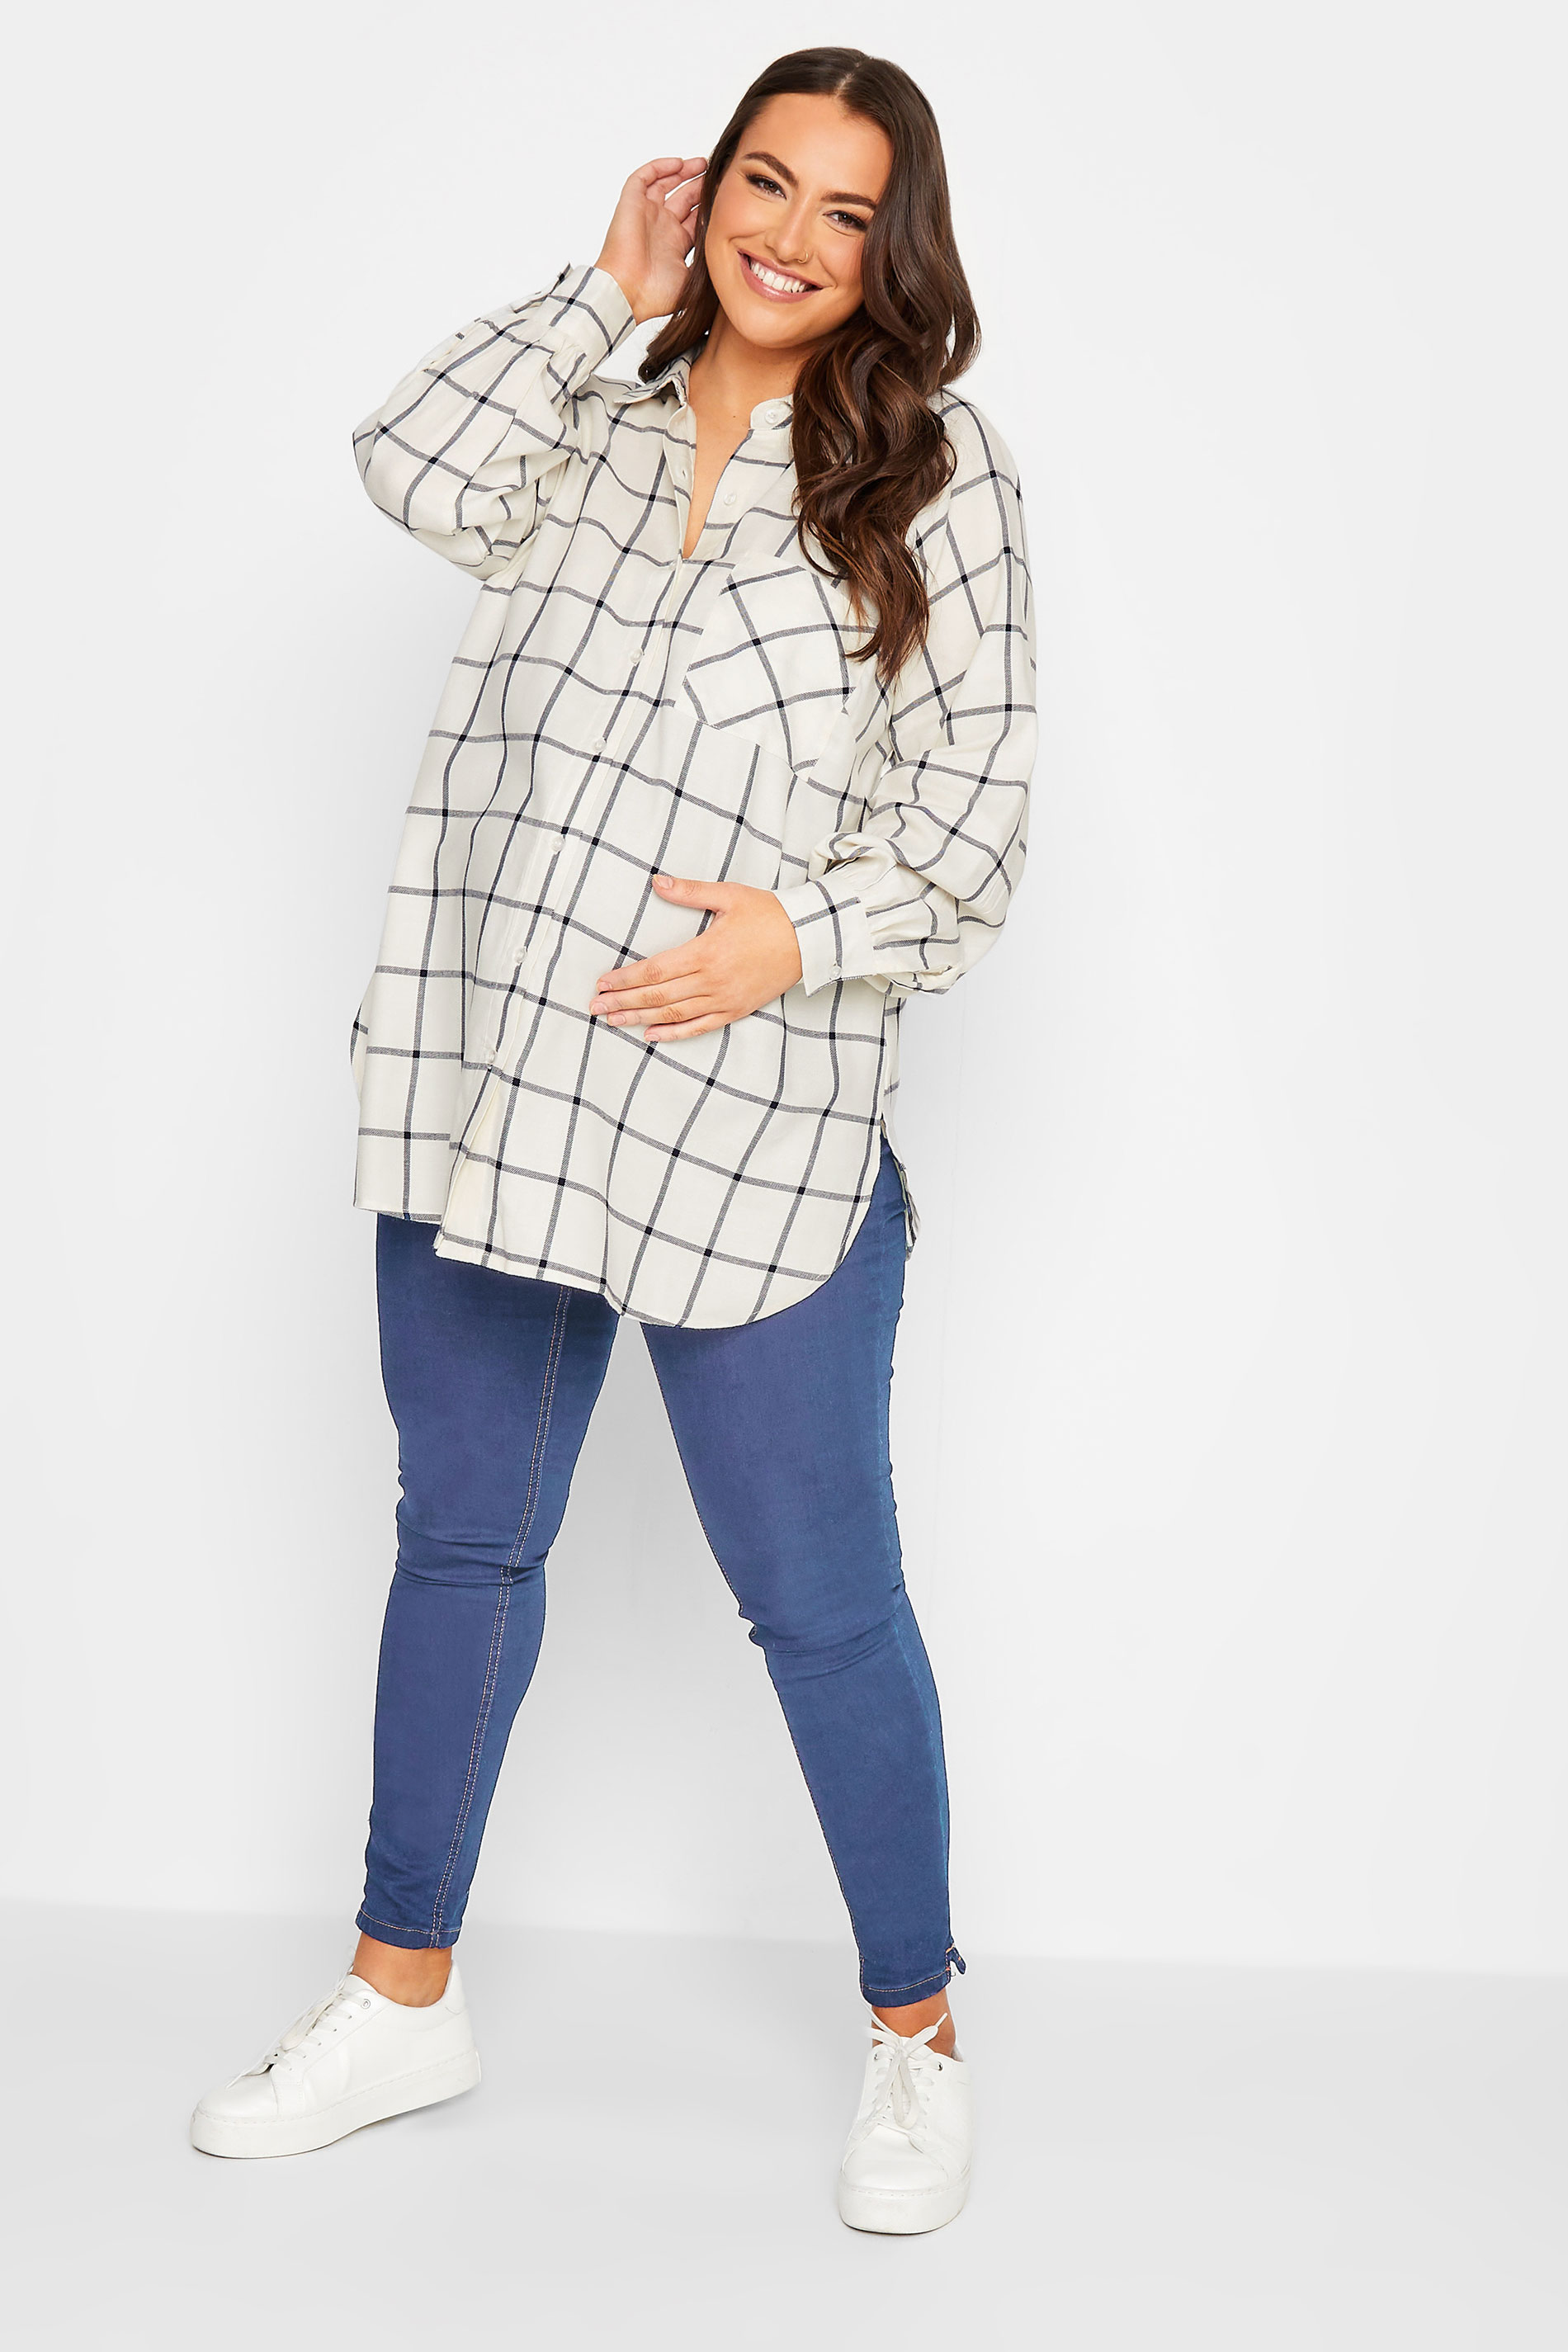 BUMP IT UP MATERNITY Curve White & Black Check Long Sleeve Shirt | Yours Clothing 2